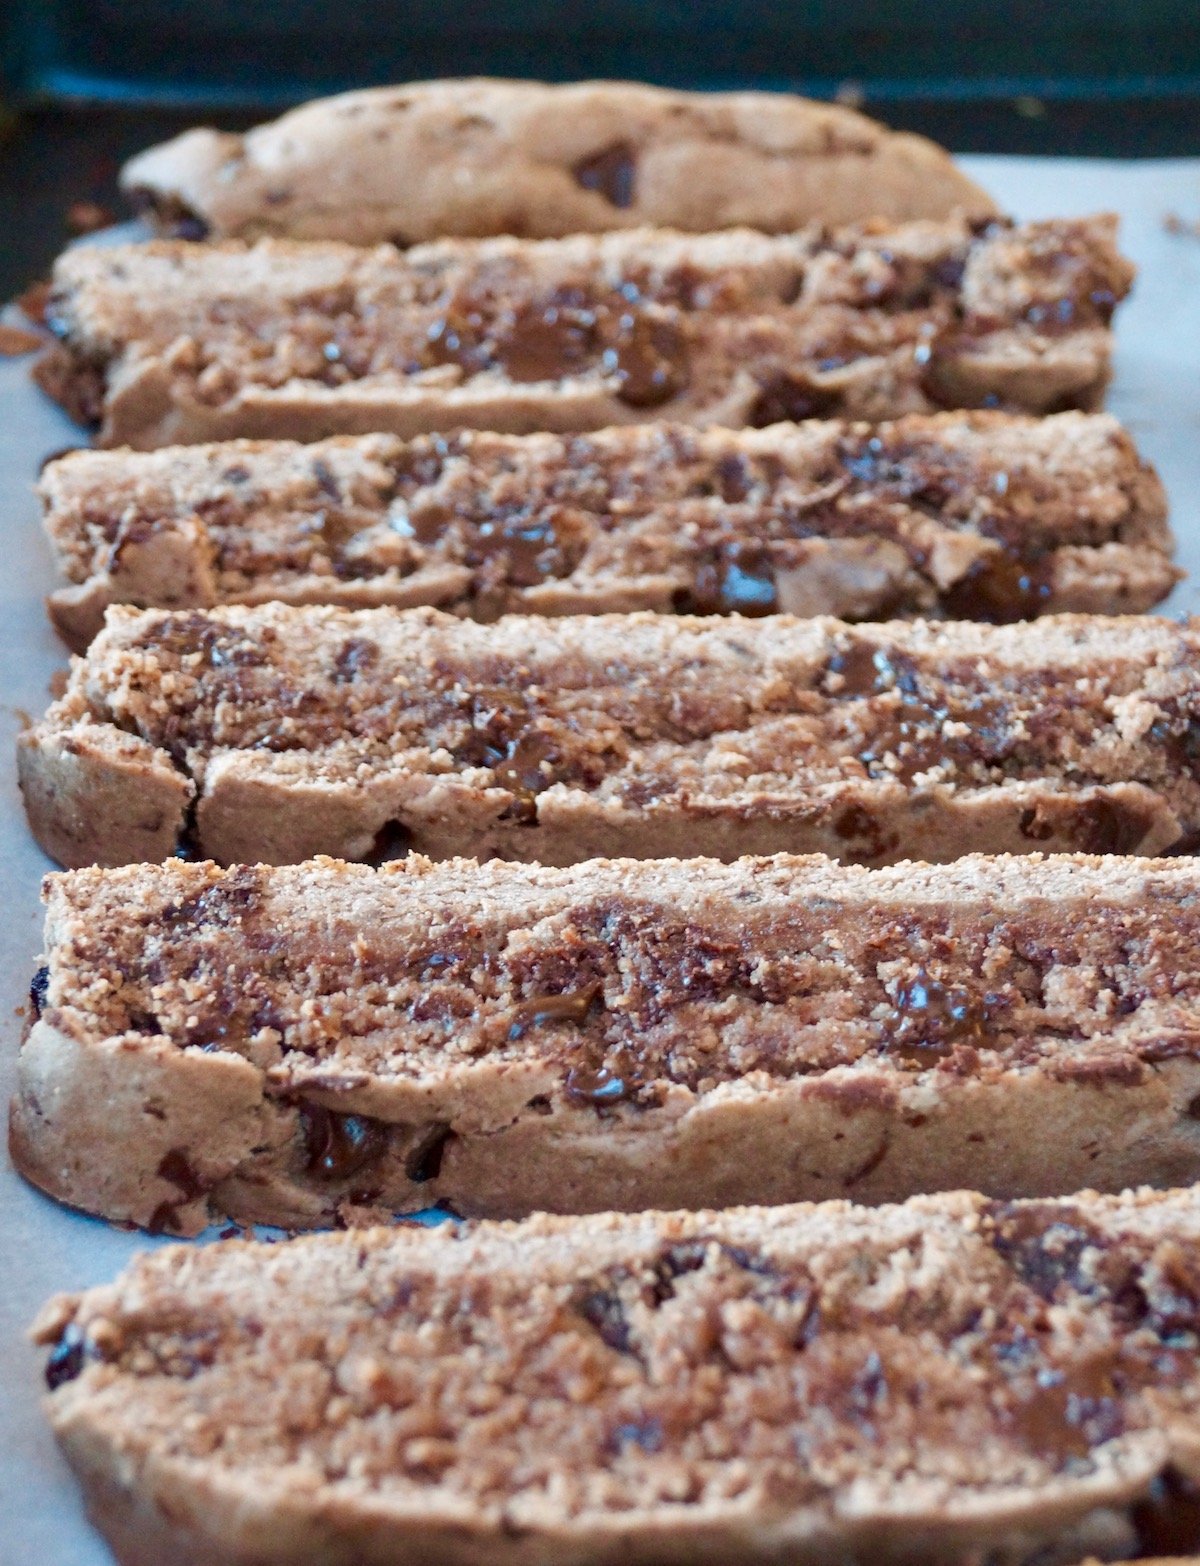 Slices of chocolate gluten-free biscotti on parchment paper